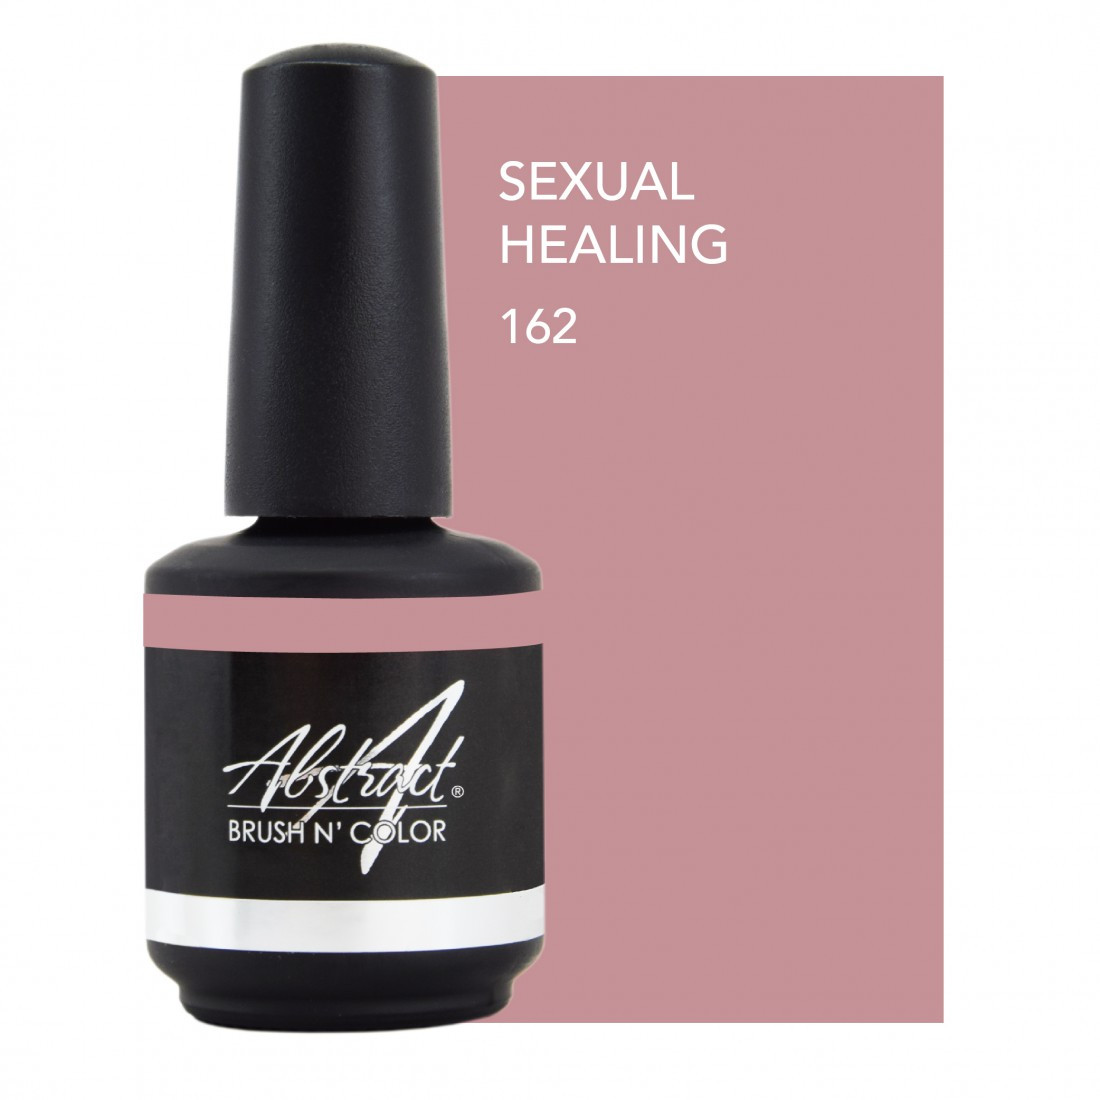 Abstract Sexual healing 15 ml